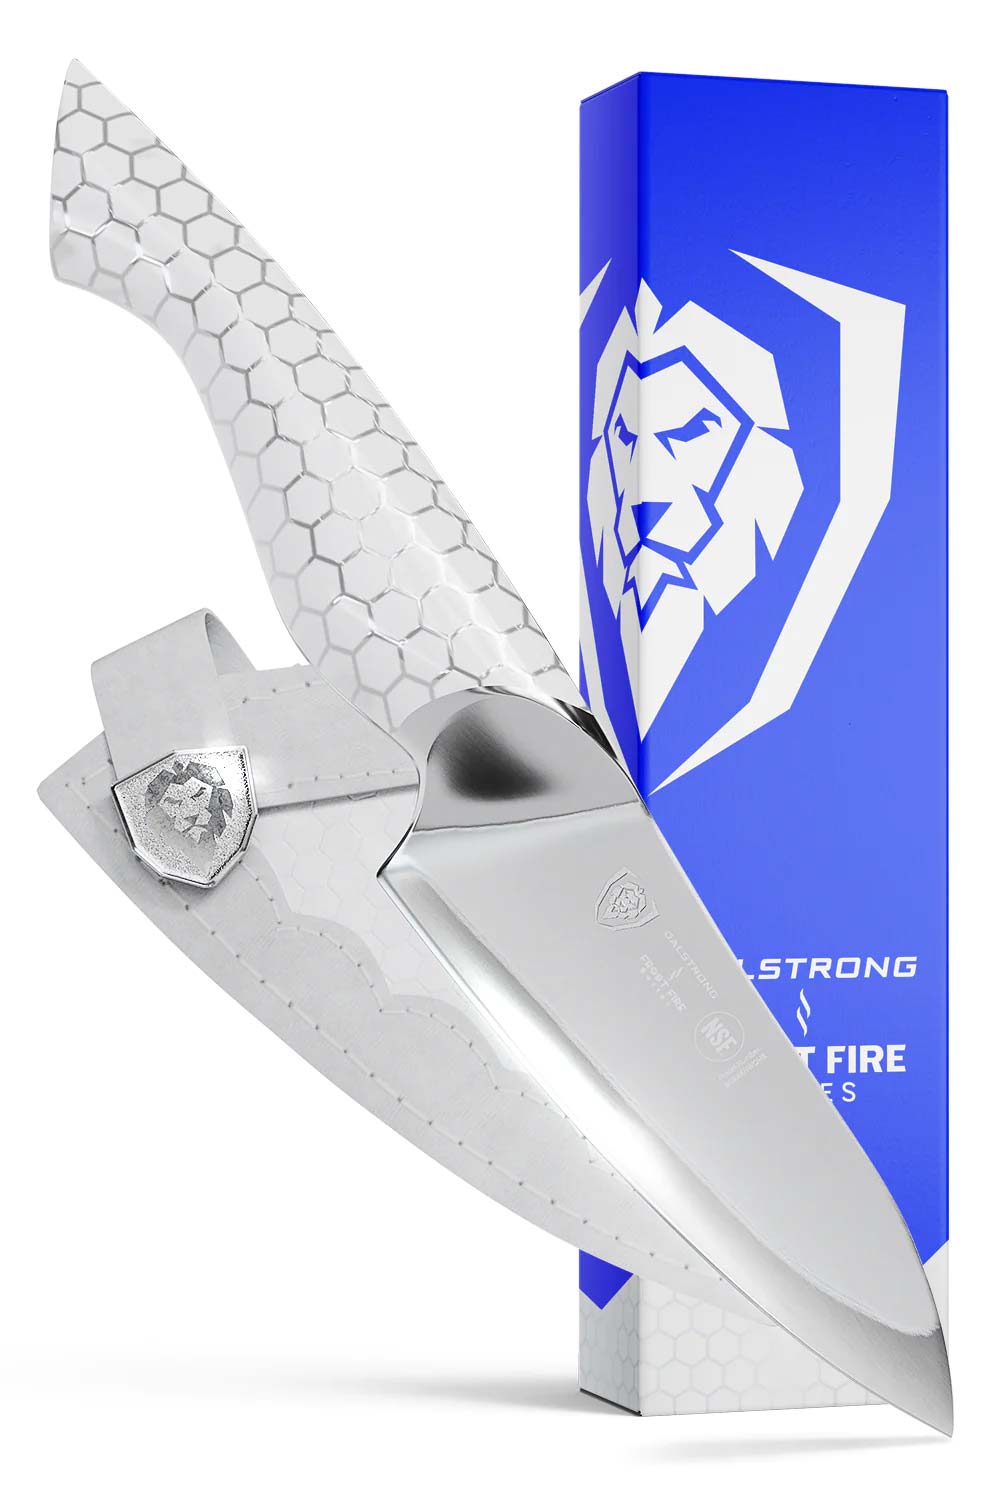 Dalstrong frost fire series 3.5 inch paring knife in front of it's premium packaging.